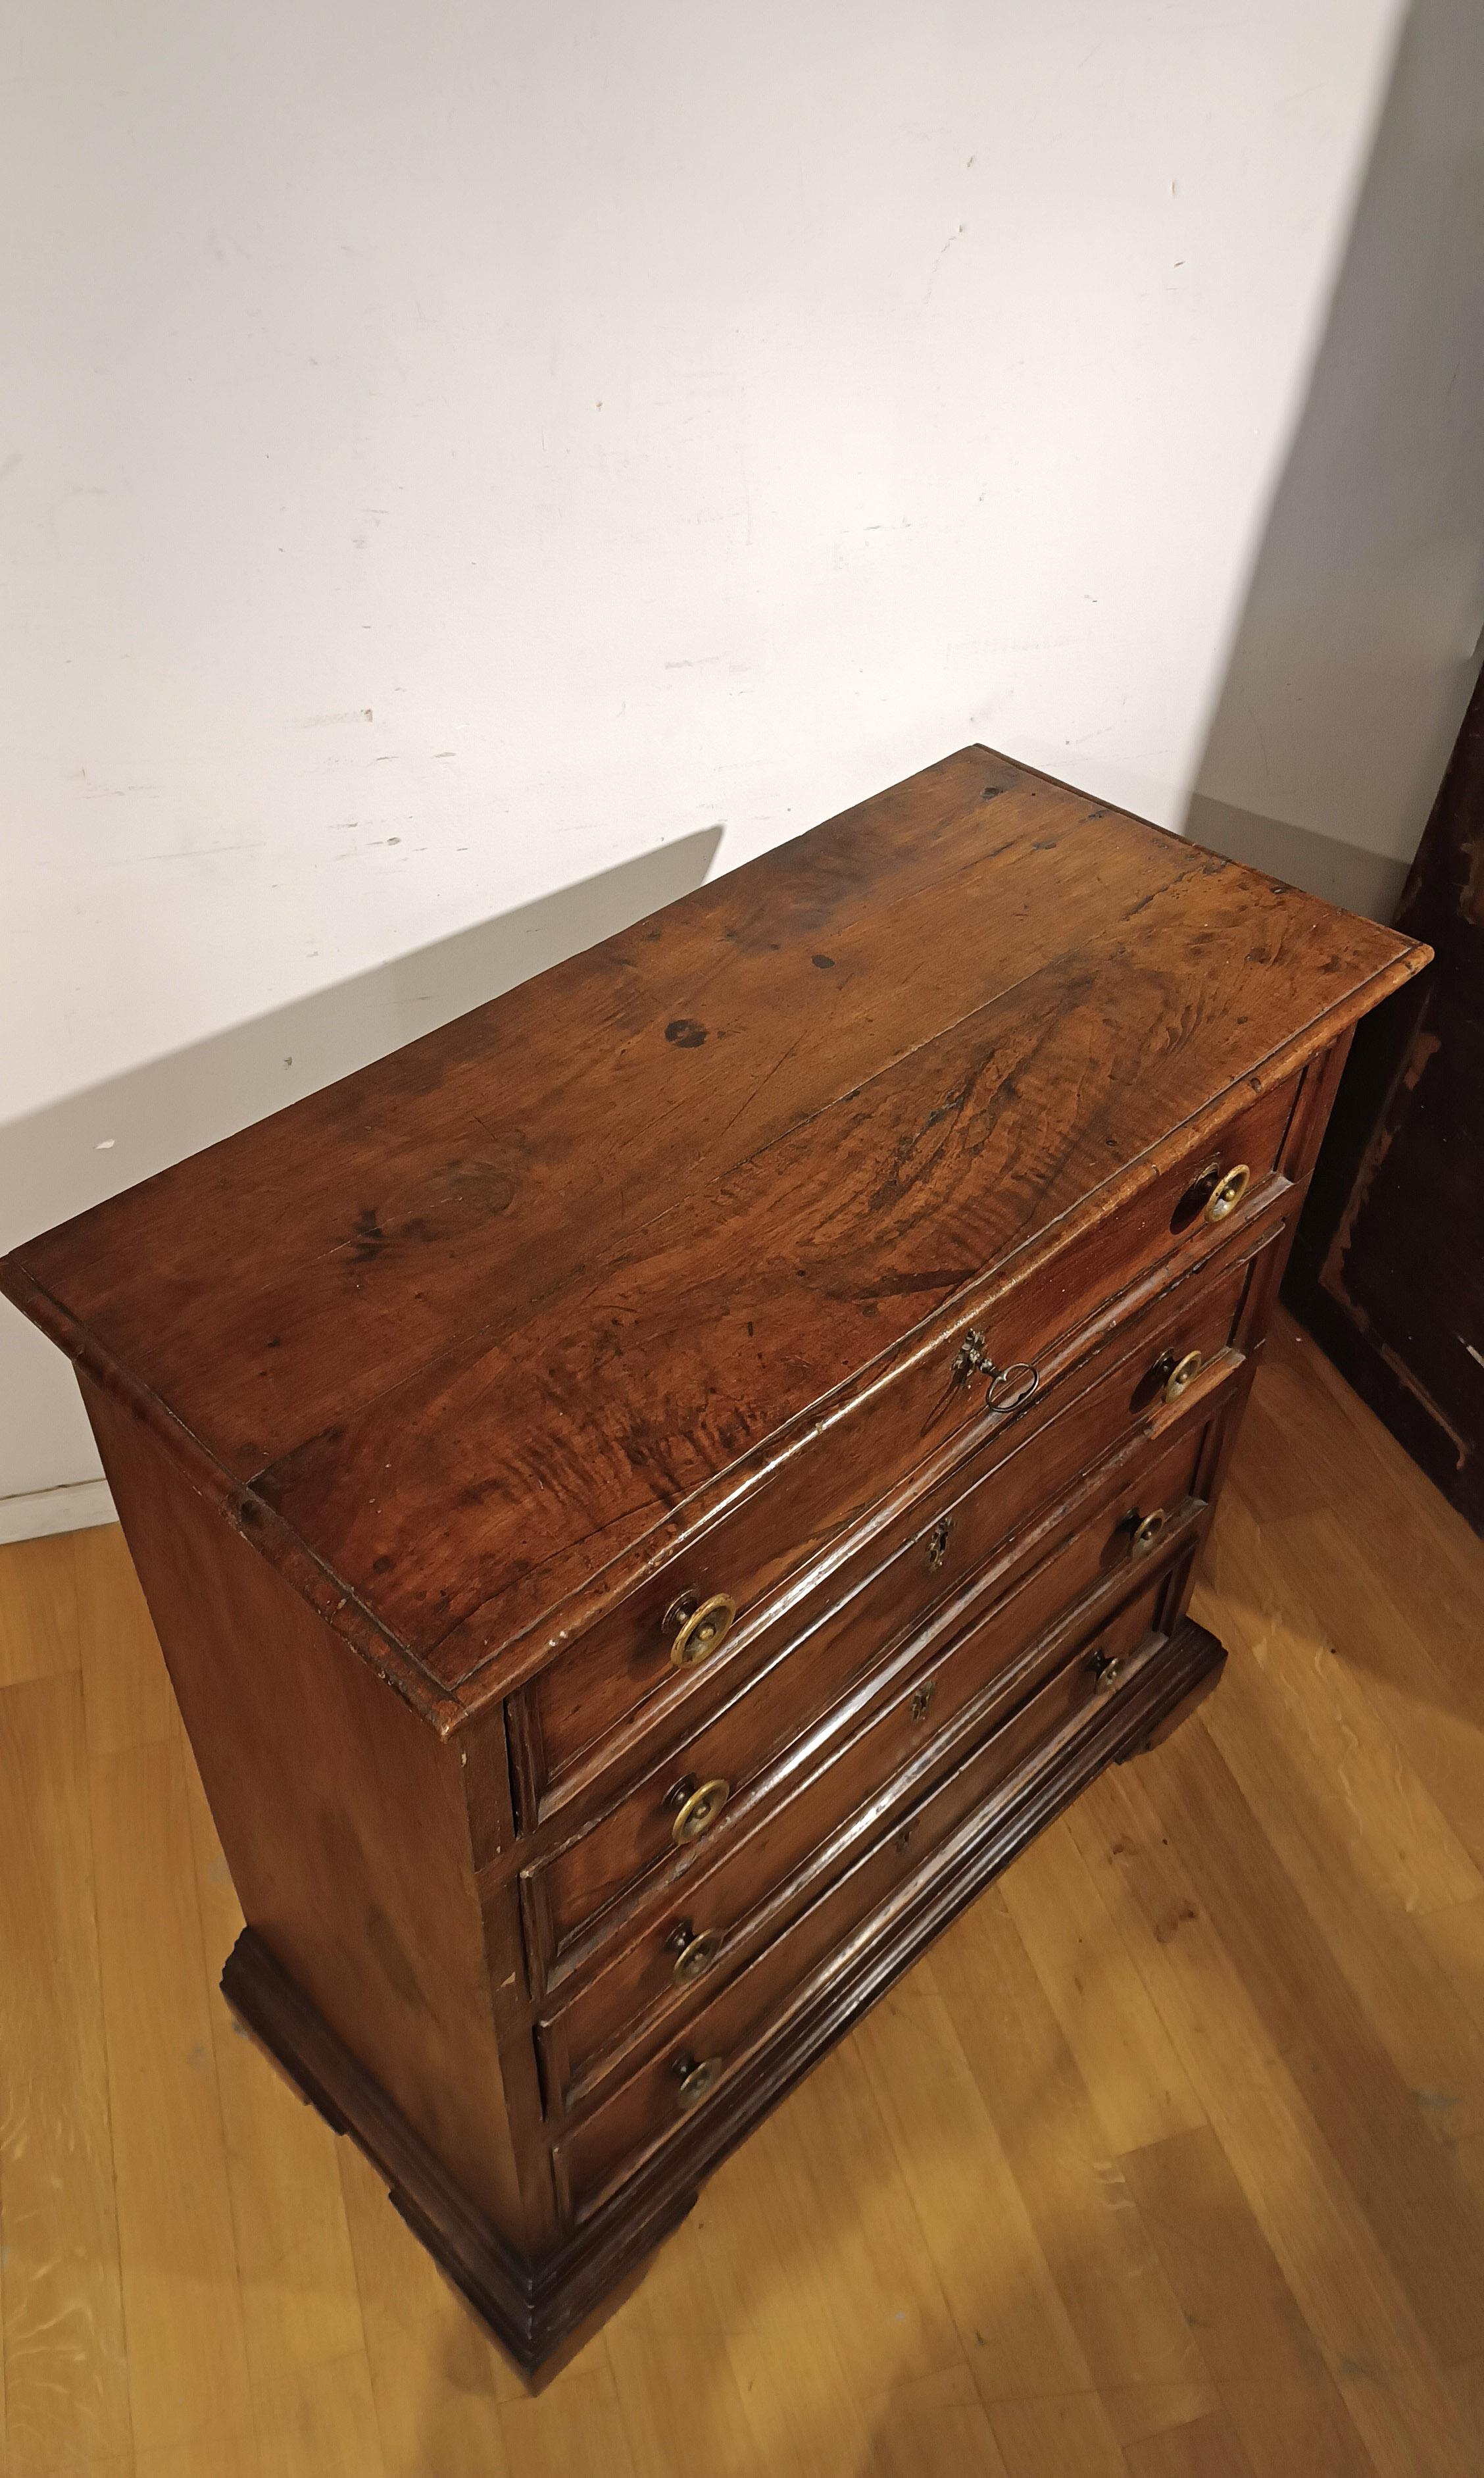 17th Century 17th CENTURY CHEST OF DRAWERS IN SOLID AND VENEREED WALNUT For Sale